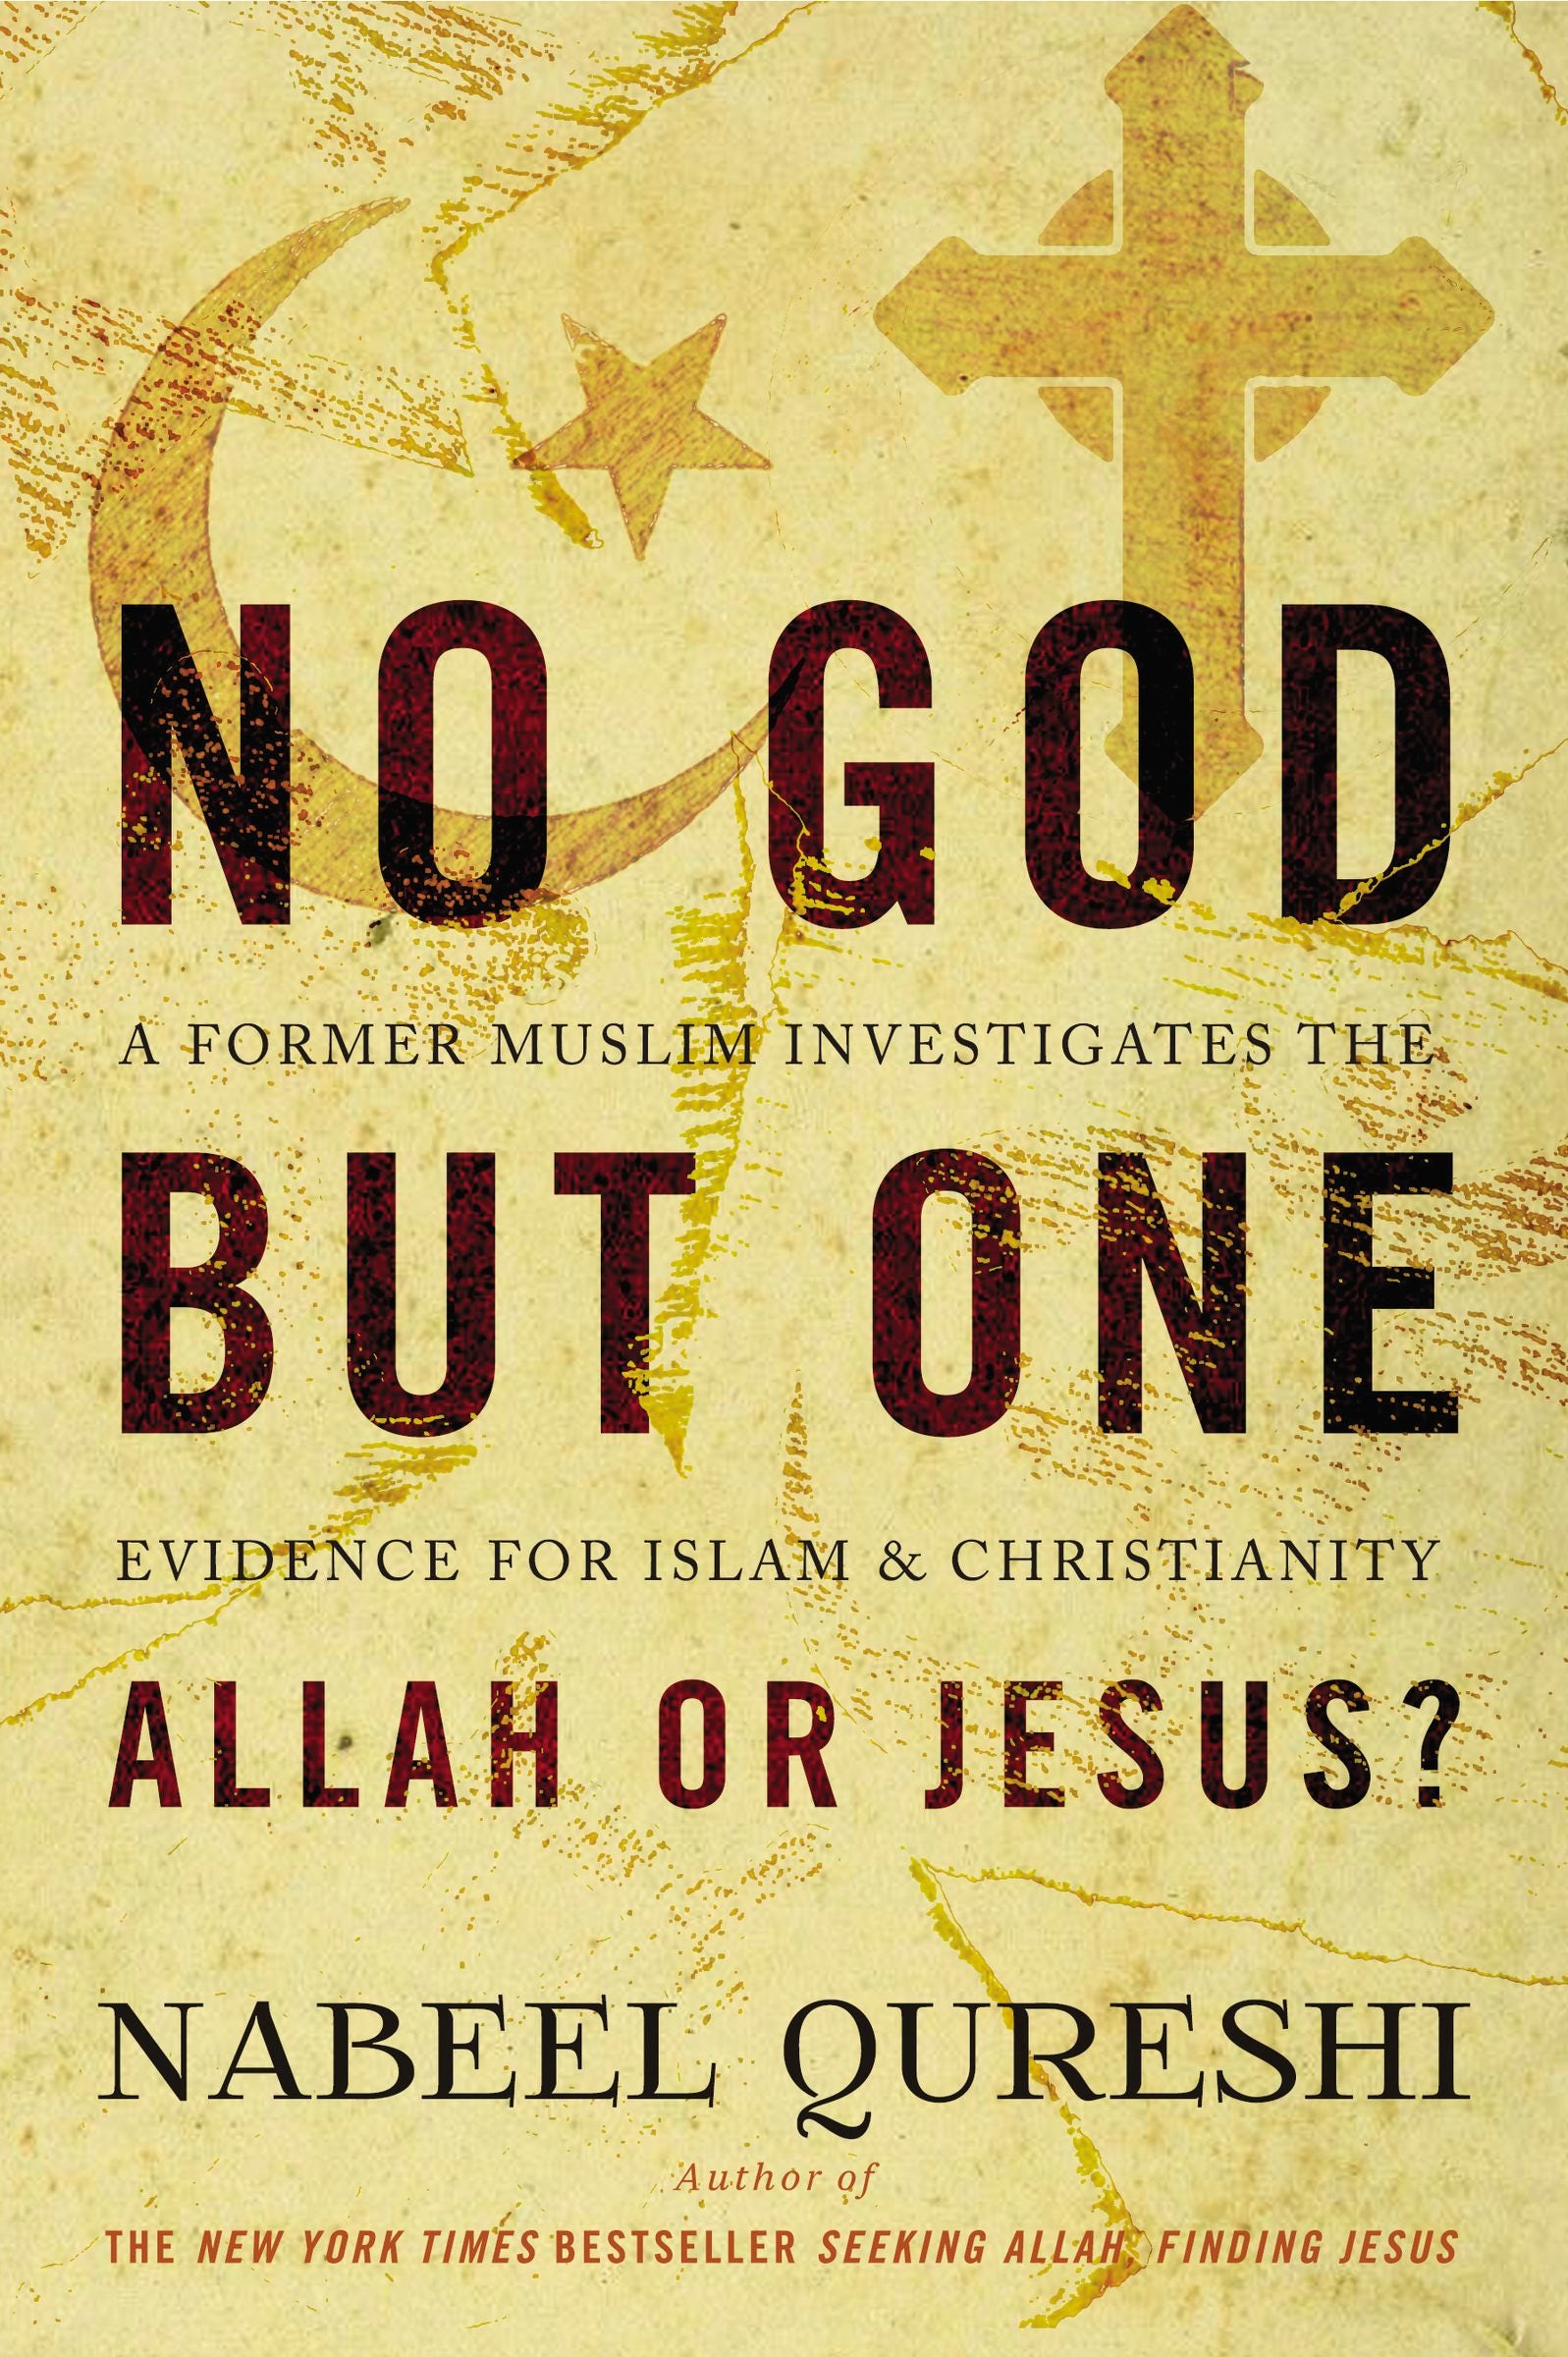 No God but One: Allah or Jesus? - A Former Muslim Investigates the Evidence for Islam & Christianity